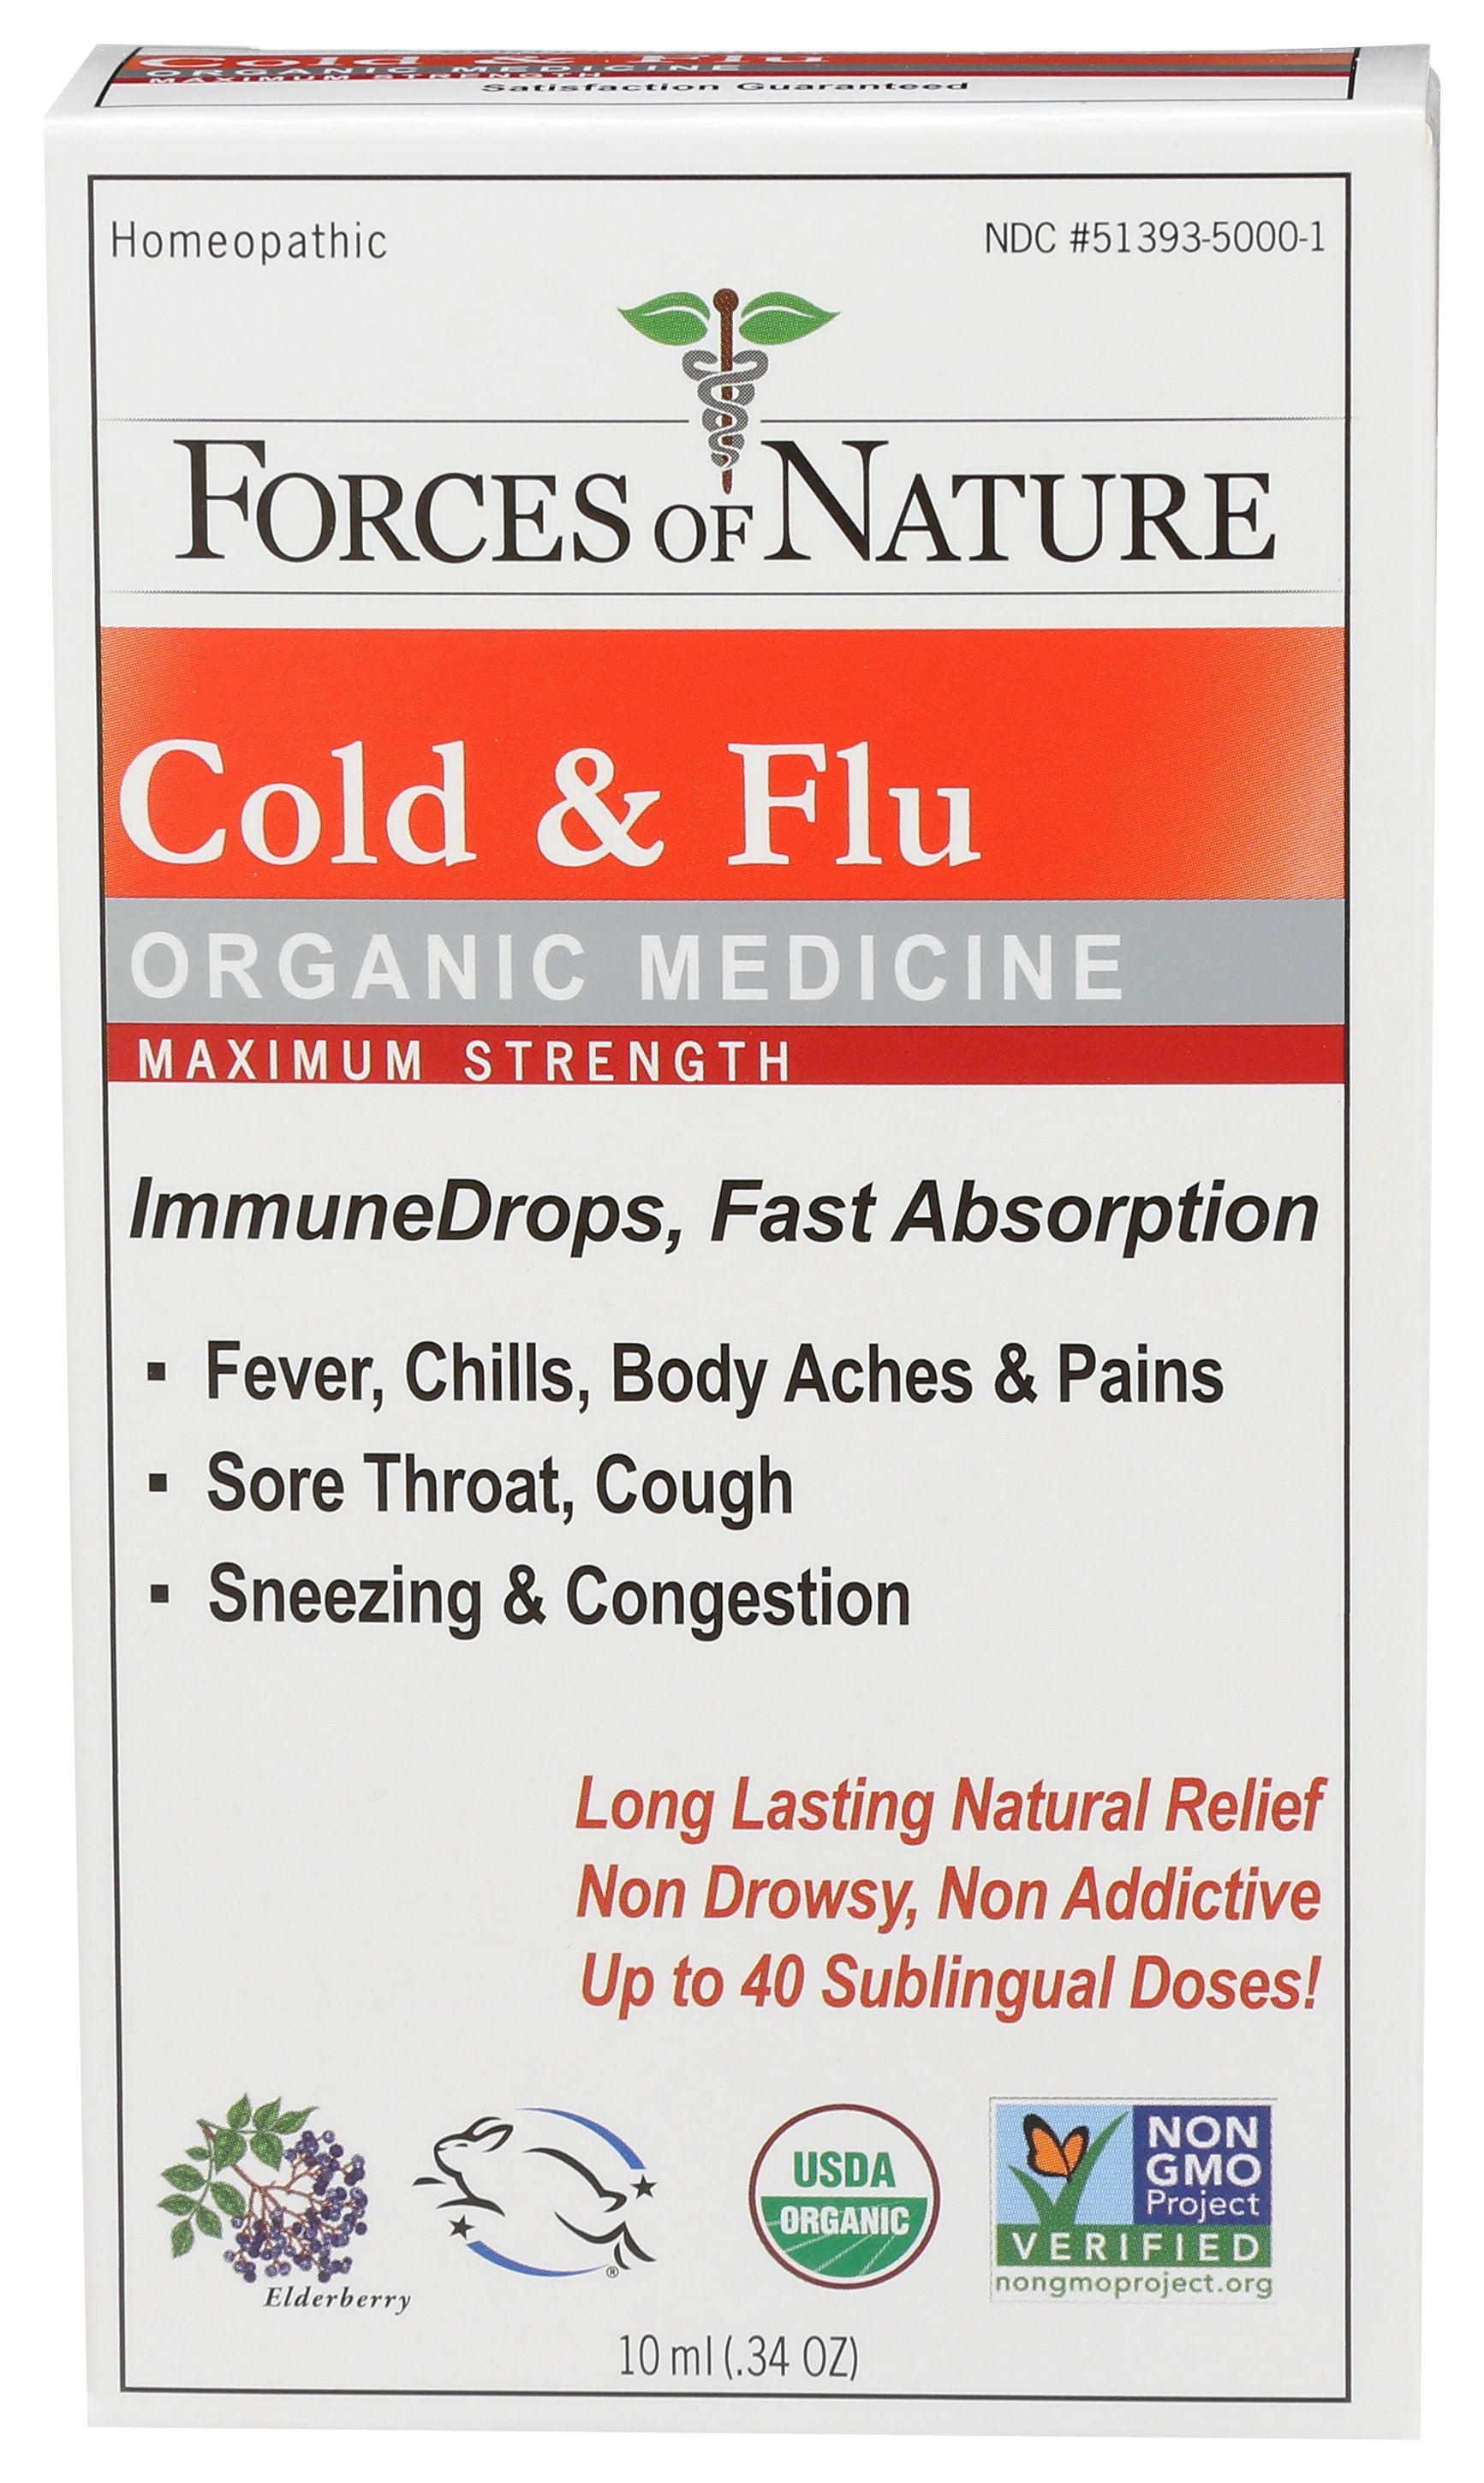 FORCES OF NATURE IMMUNEDROPS COLD FLU - Case of 3